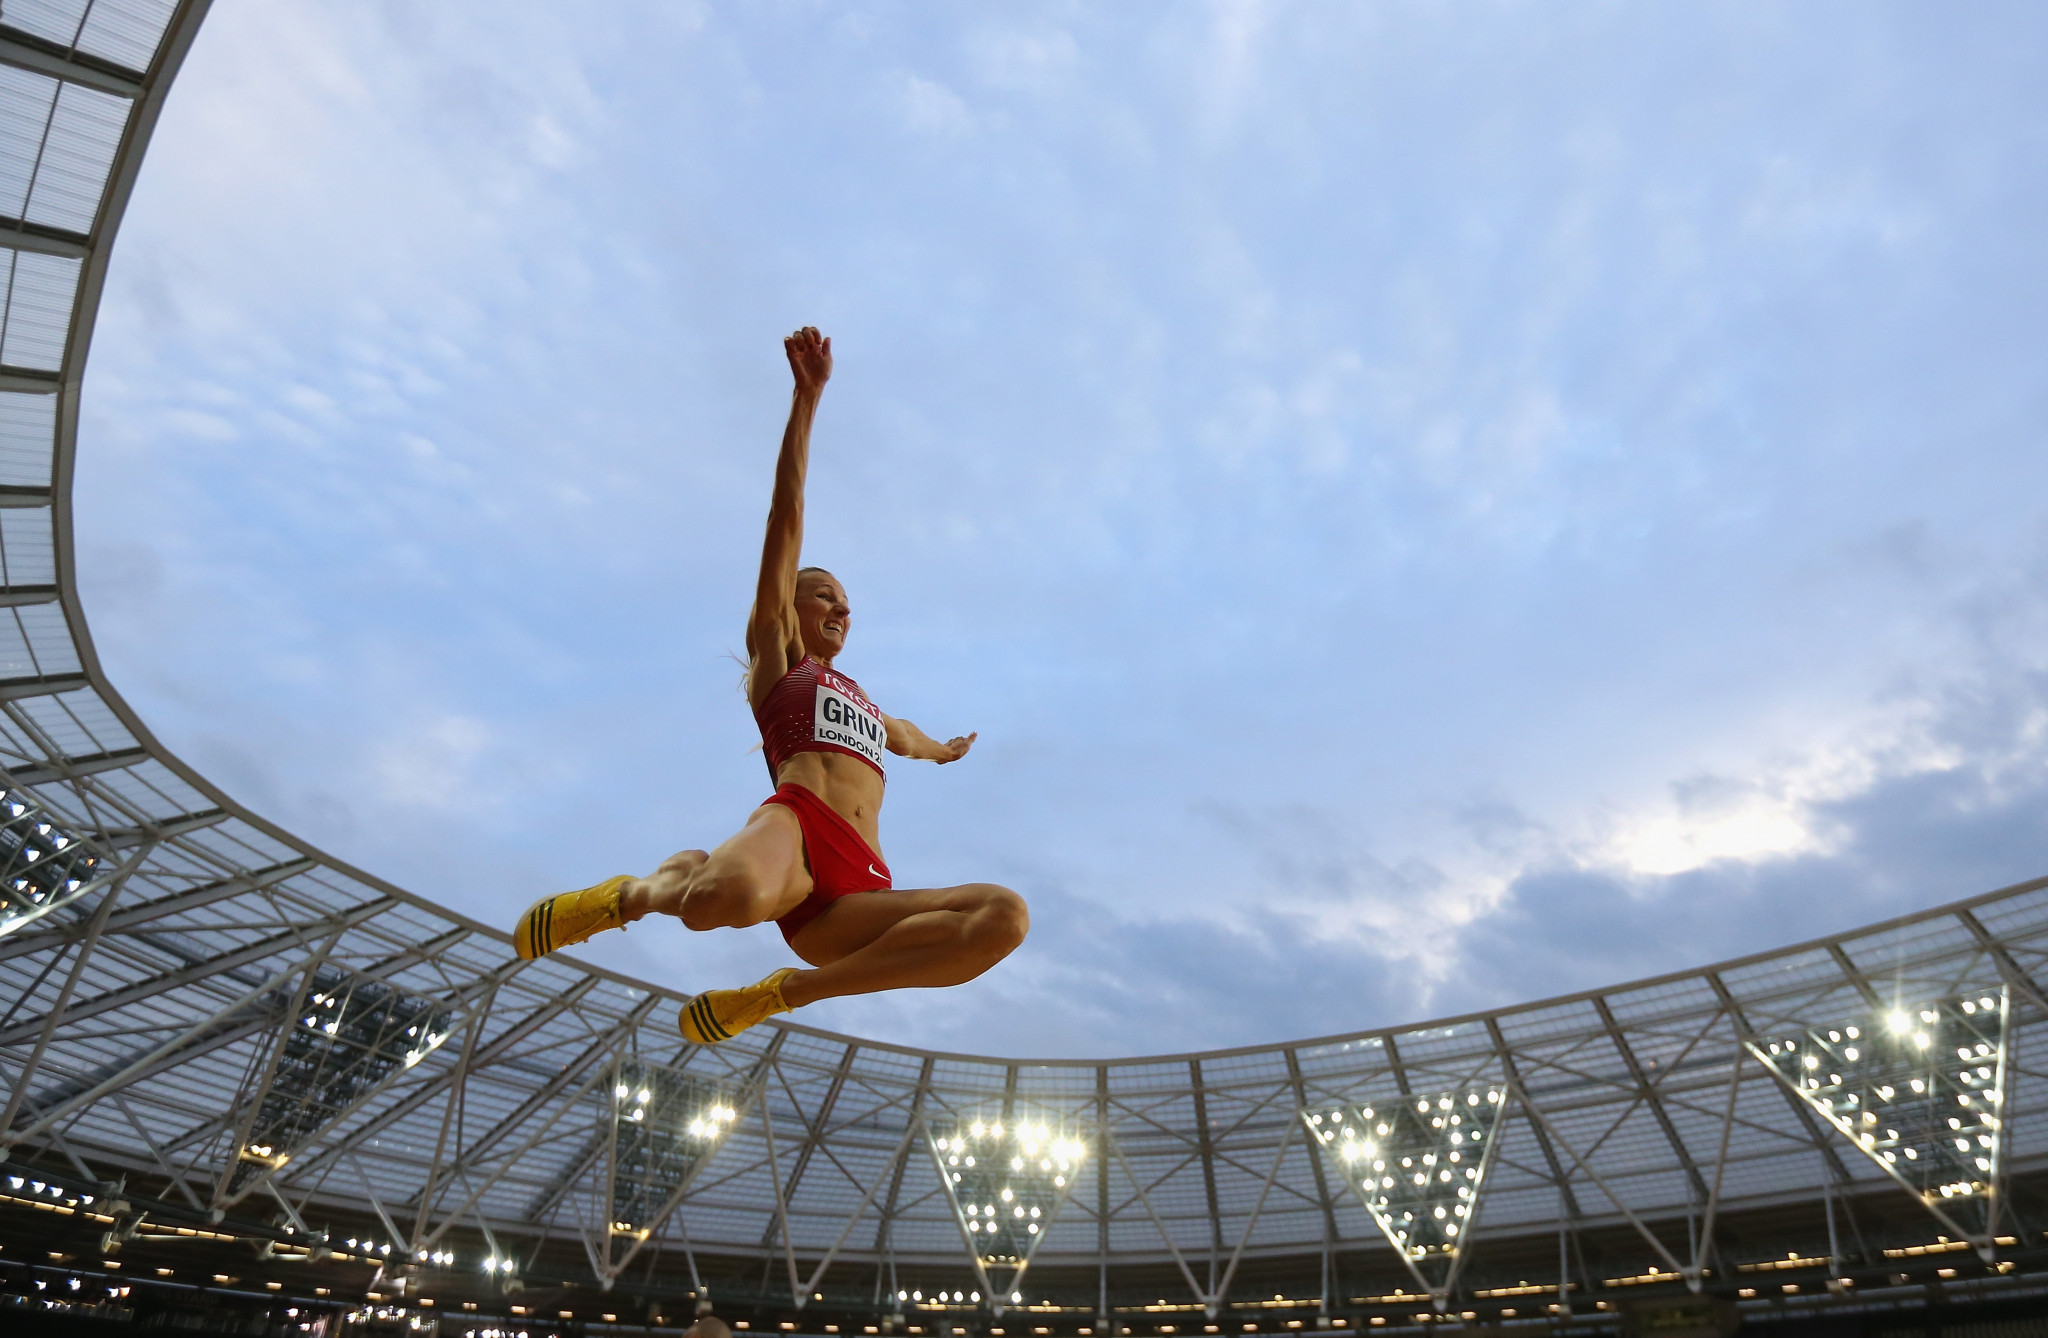 European Athletics unveils initial ideas for new dynamic event set to debut at Minsk 2019